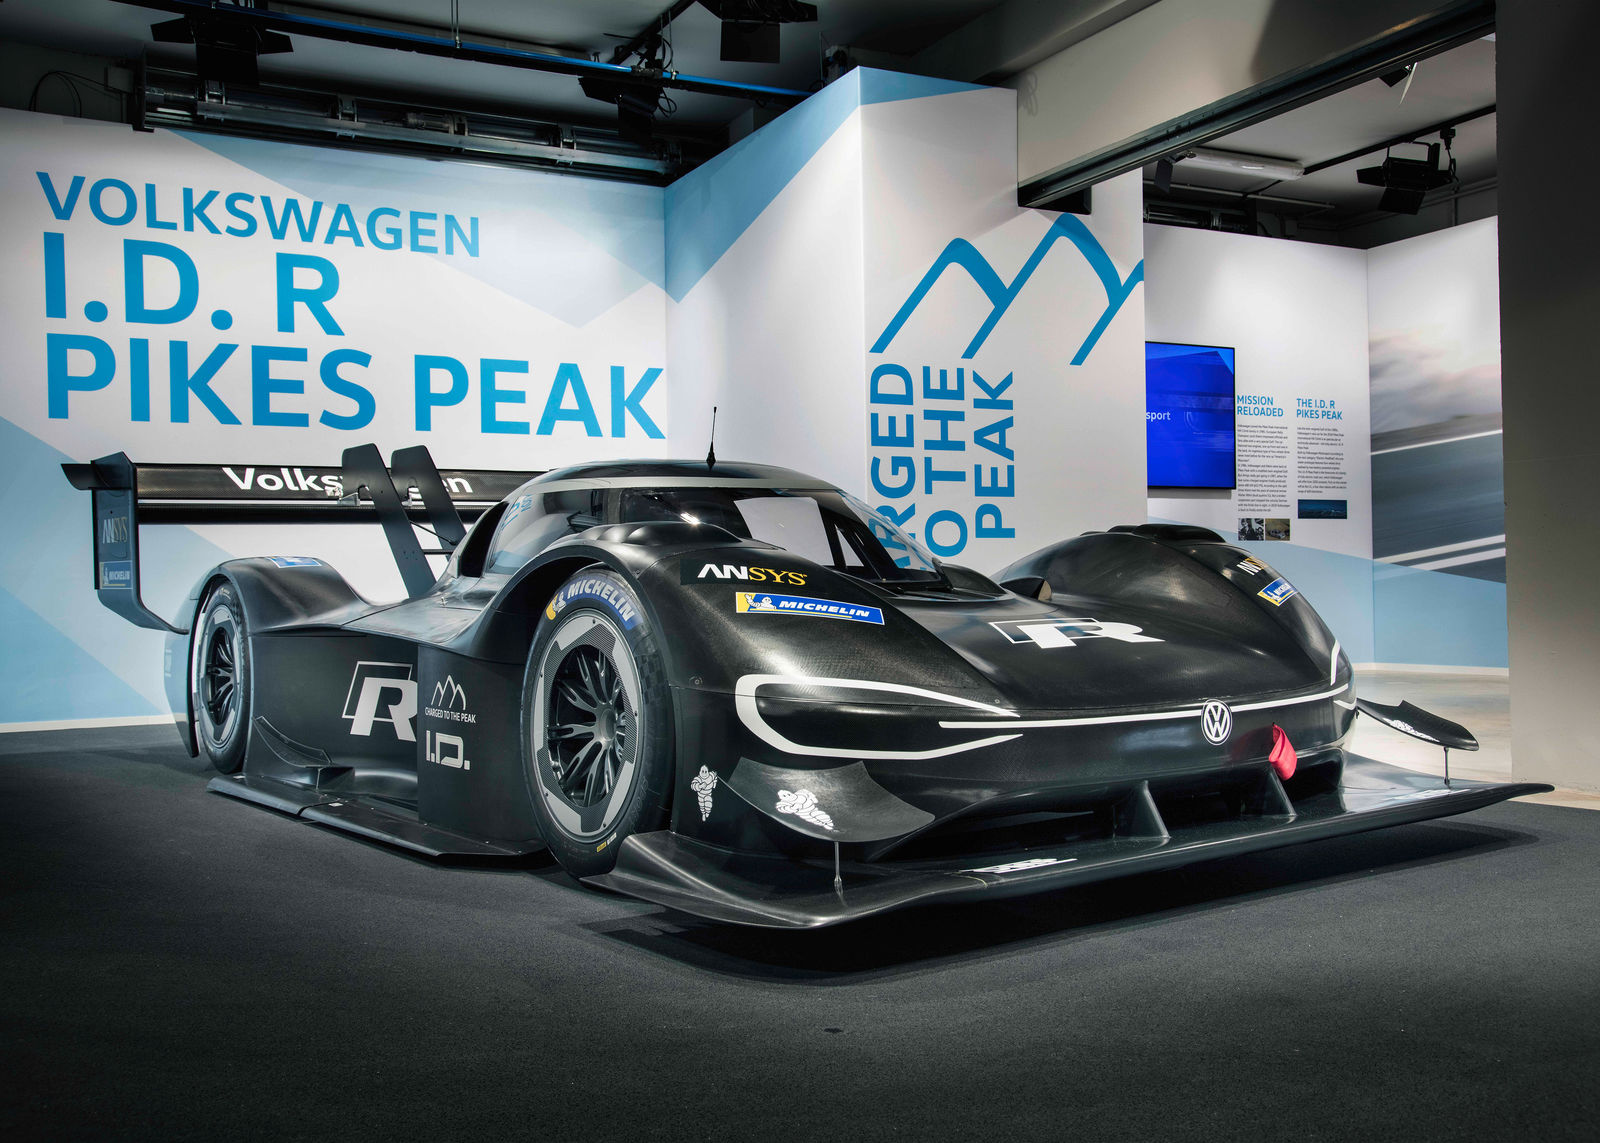 The Volkswagen ID. R Pikes Peak – Motorsport driving electromobility to the top